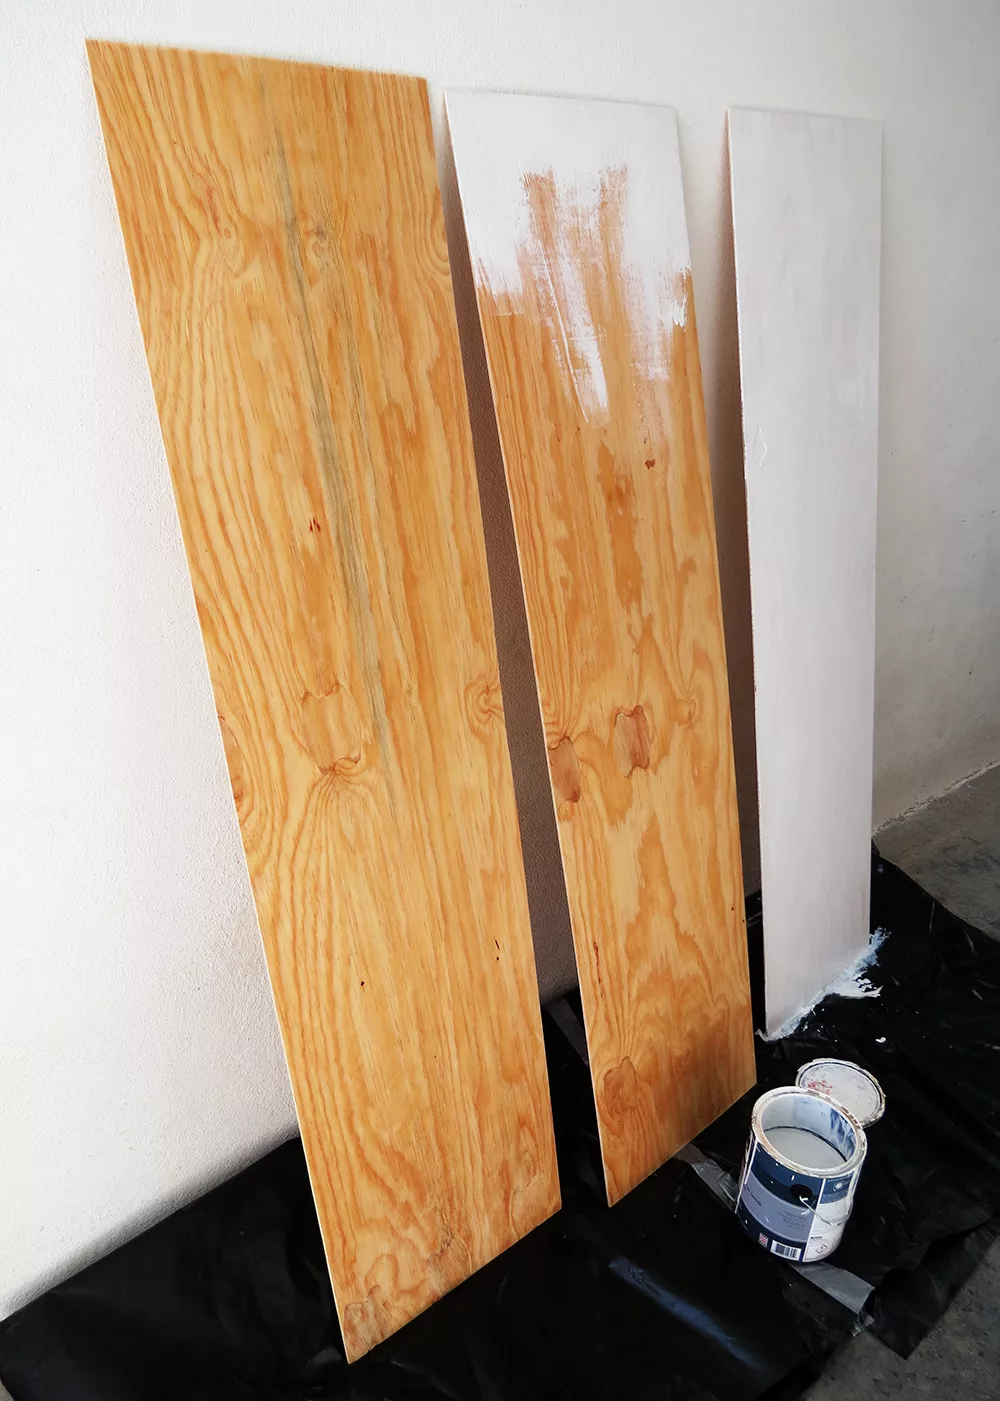 paint the divider plywood panels